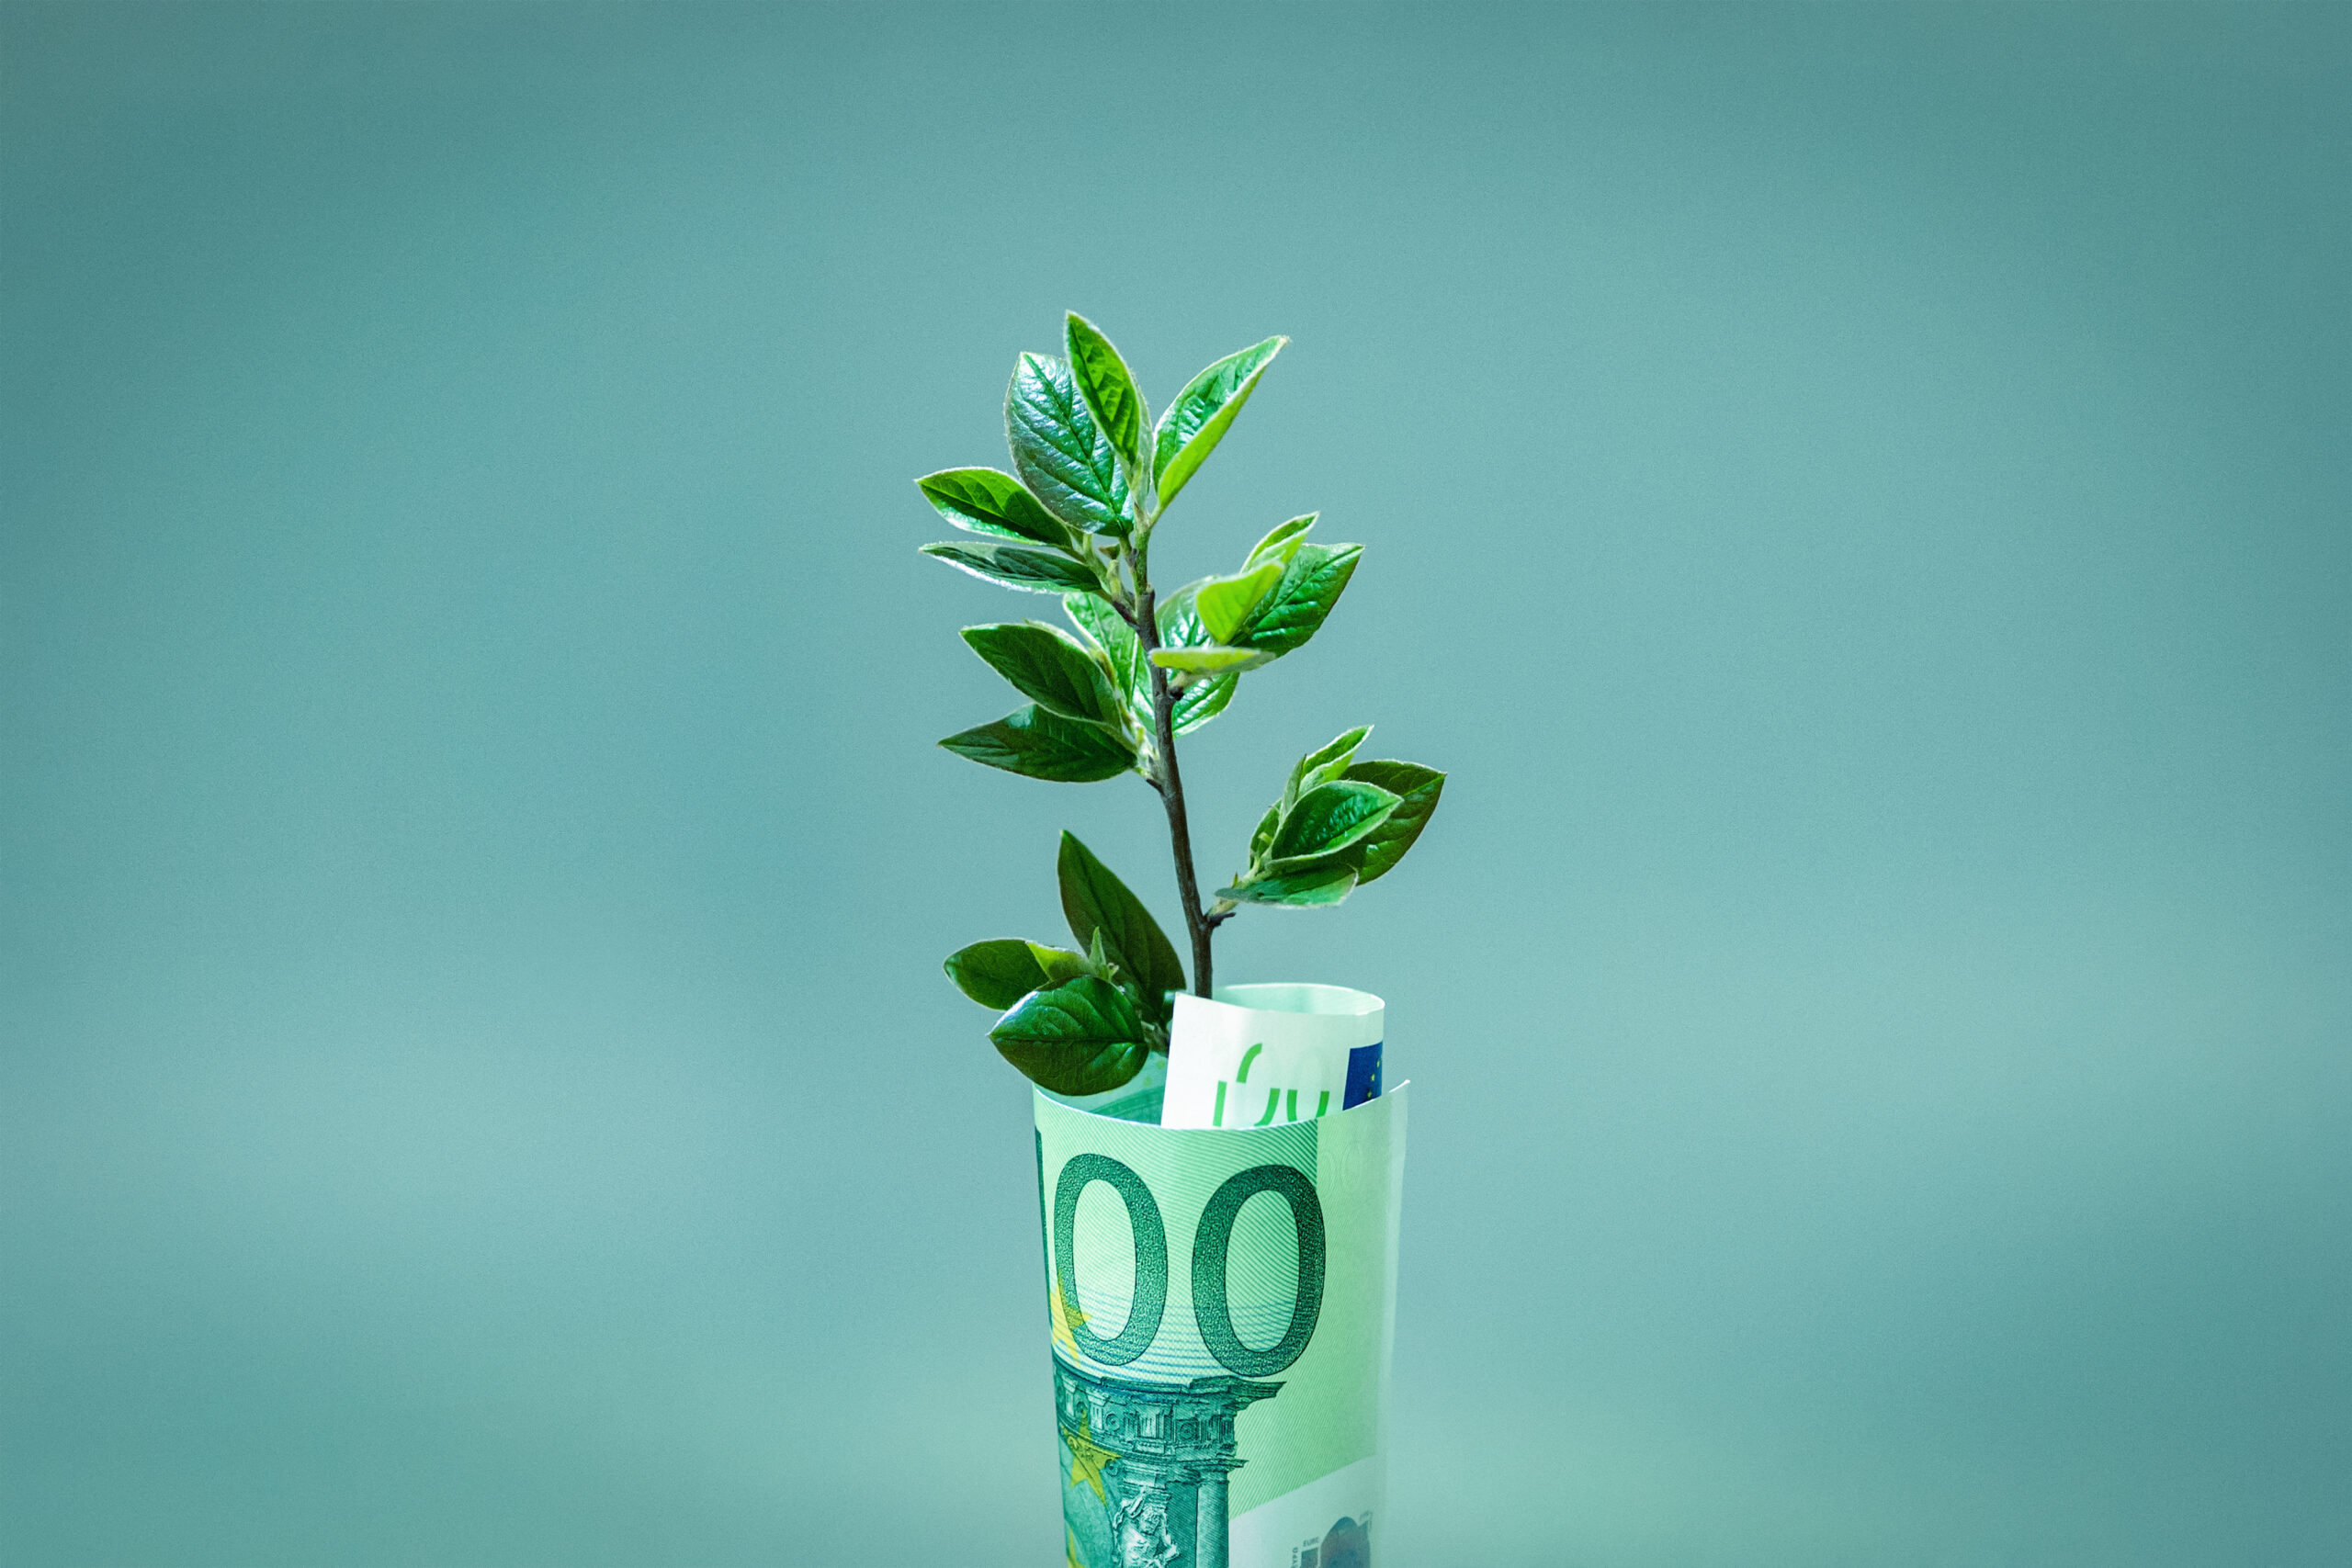 Plant growing in Euro bill for money growth and European economy concept